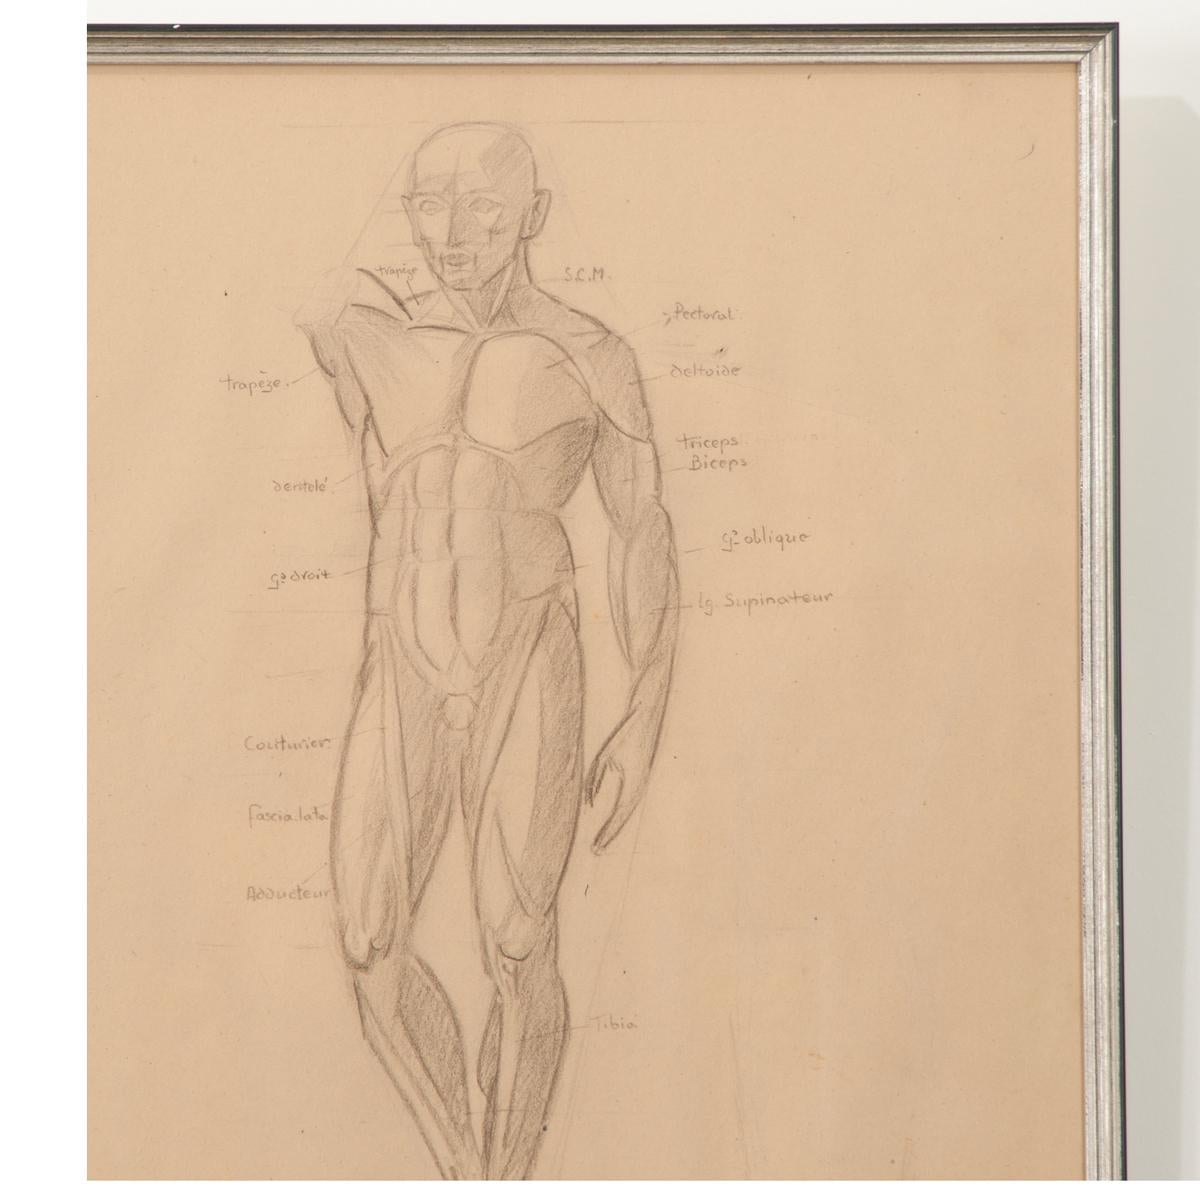 French Vintage Framed Anatomical Sketch In Good Condition For Sale In Baton Rouge, LA